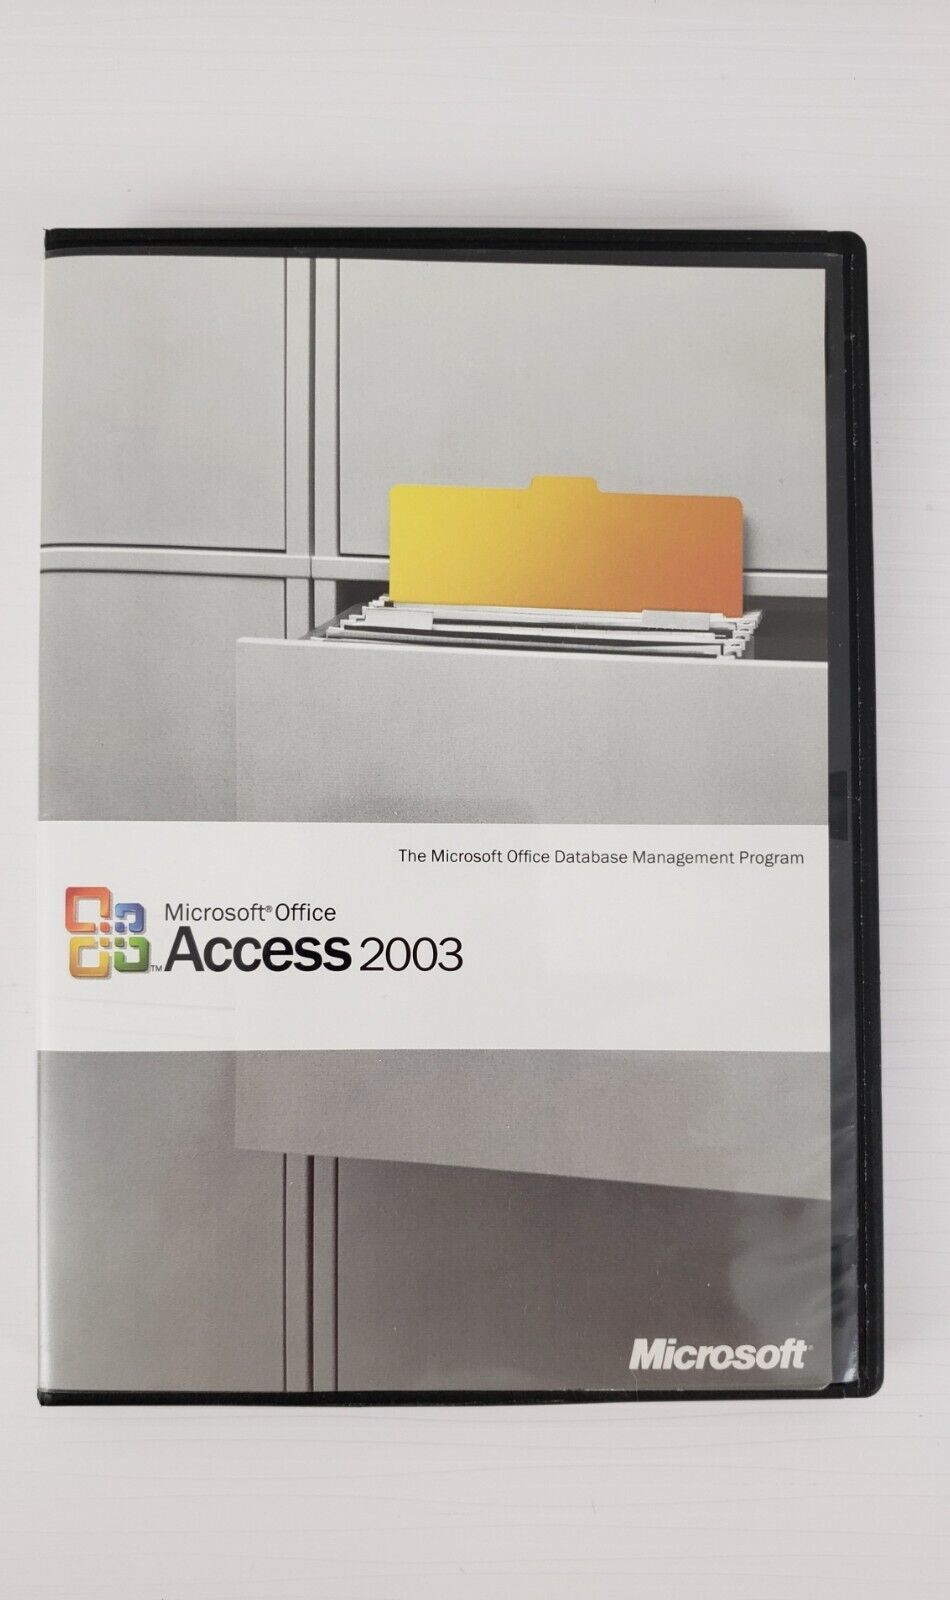 Microsoft Office Access 2003 Upgrade W/Product Key for Windows